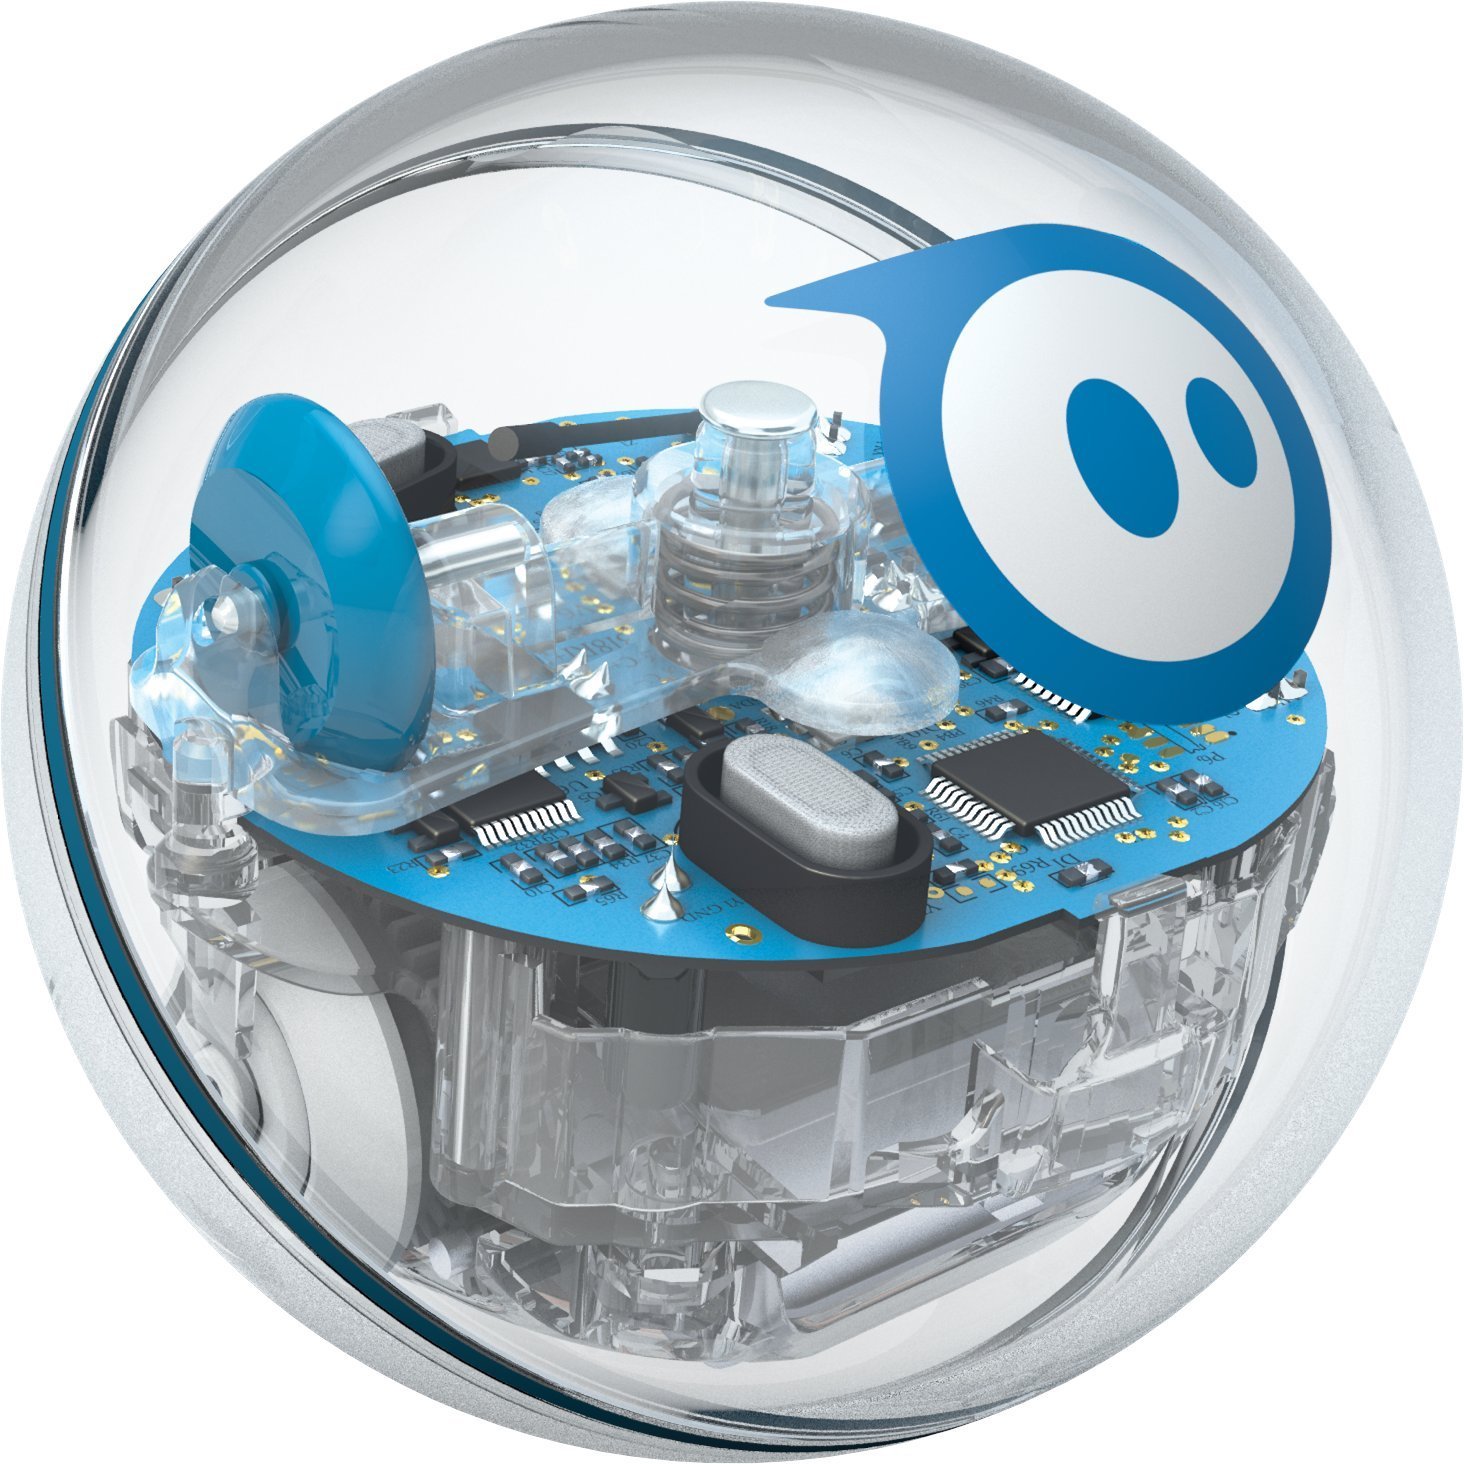 Rolling Around the World with Sphero